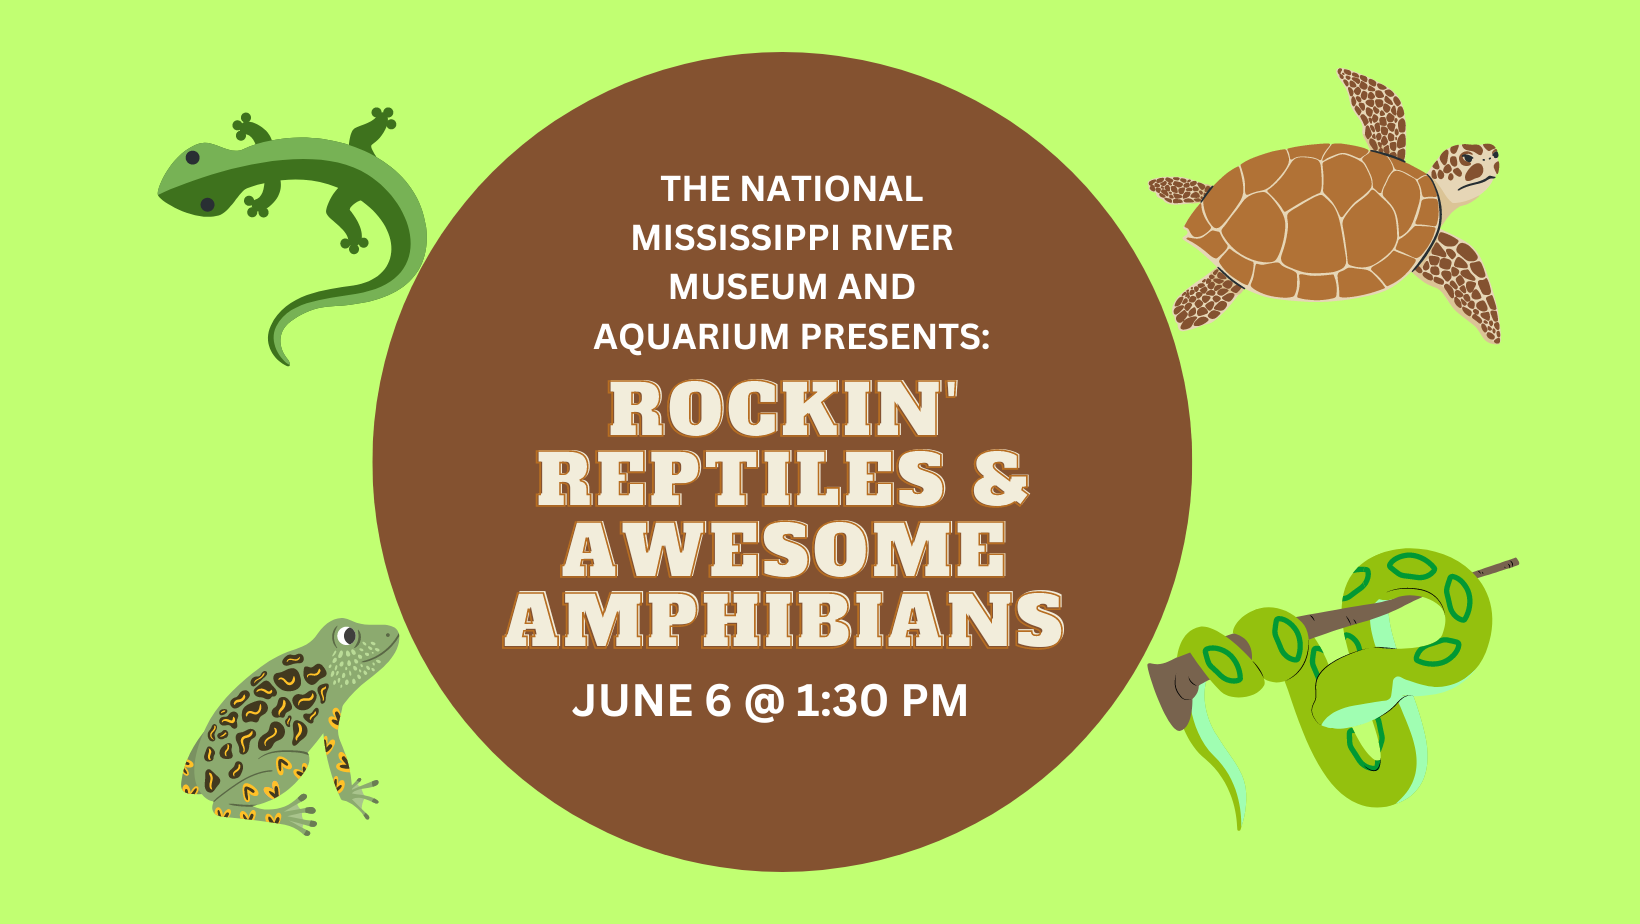 Rockin' Reptiles and Awesome Amphibians Children's Program June 6 at 1:30pm